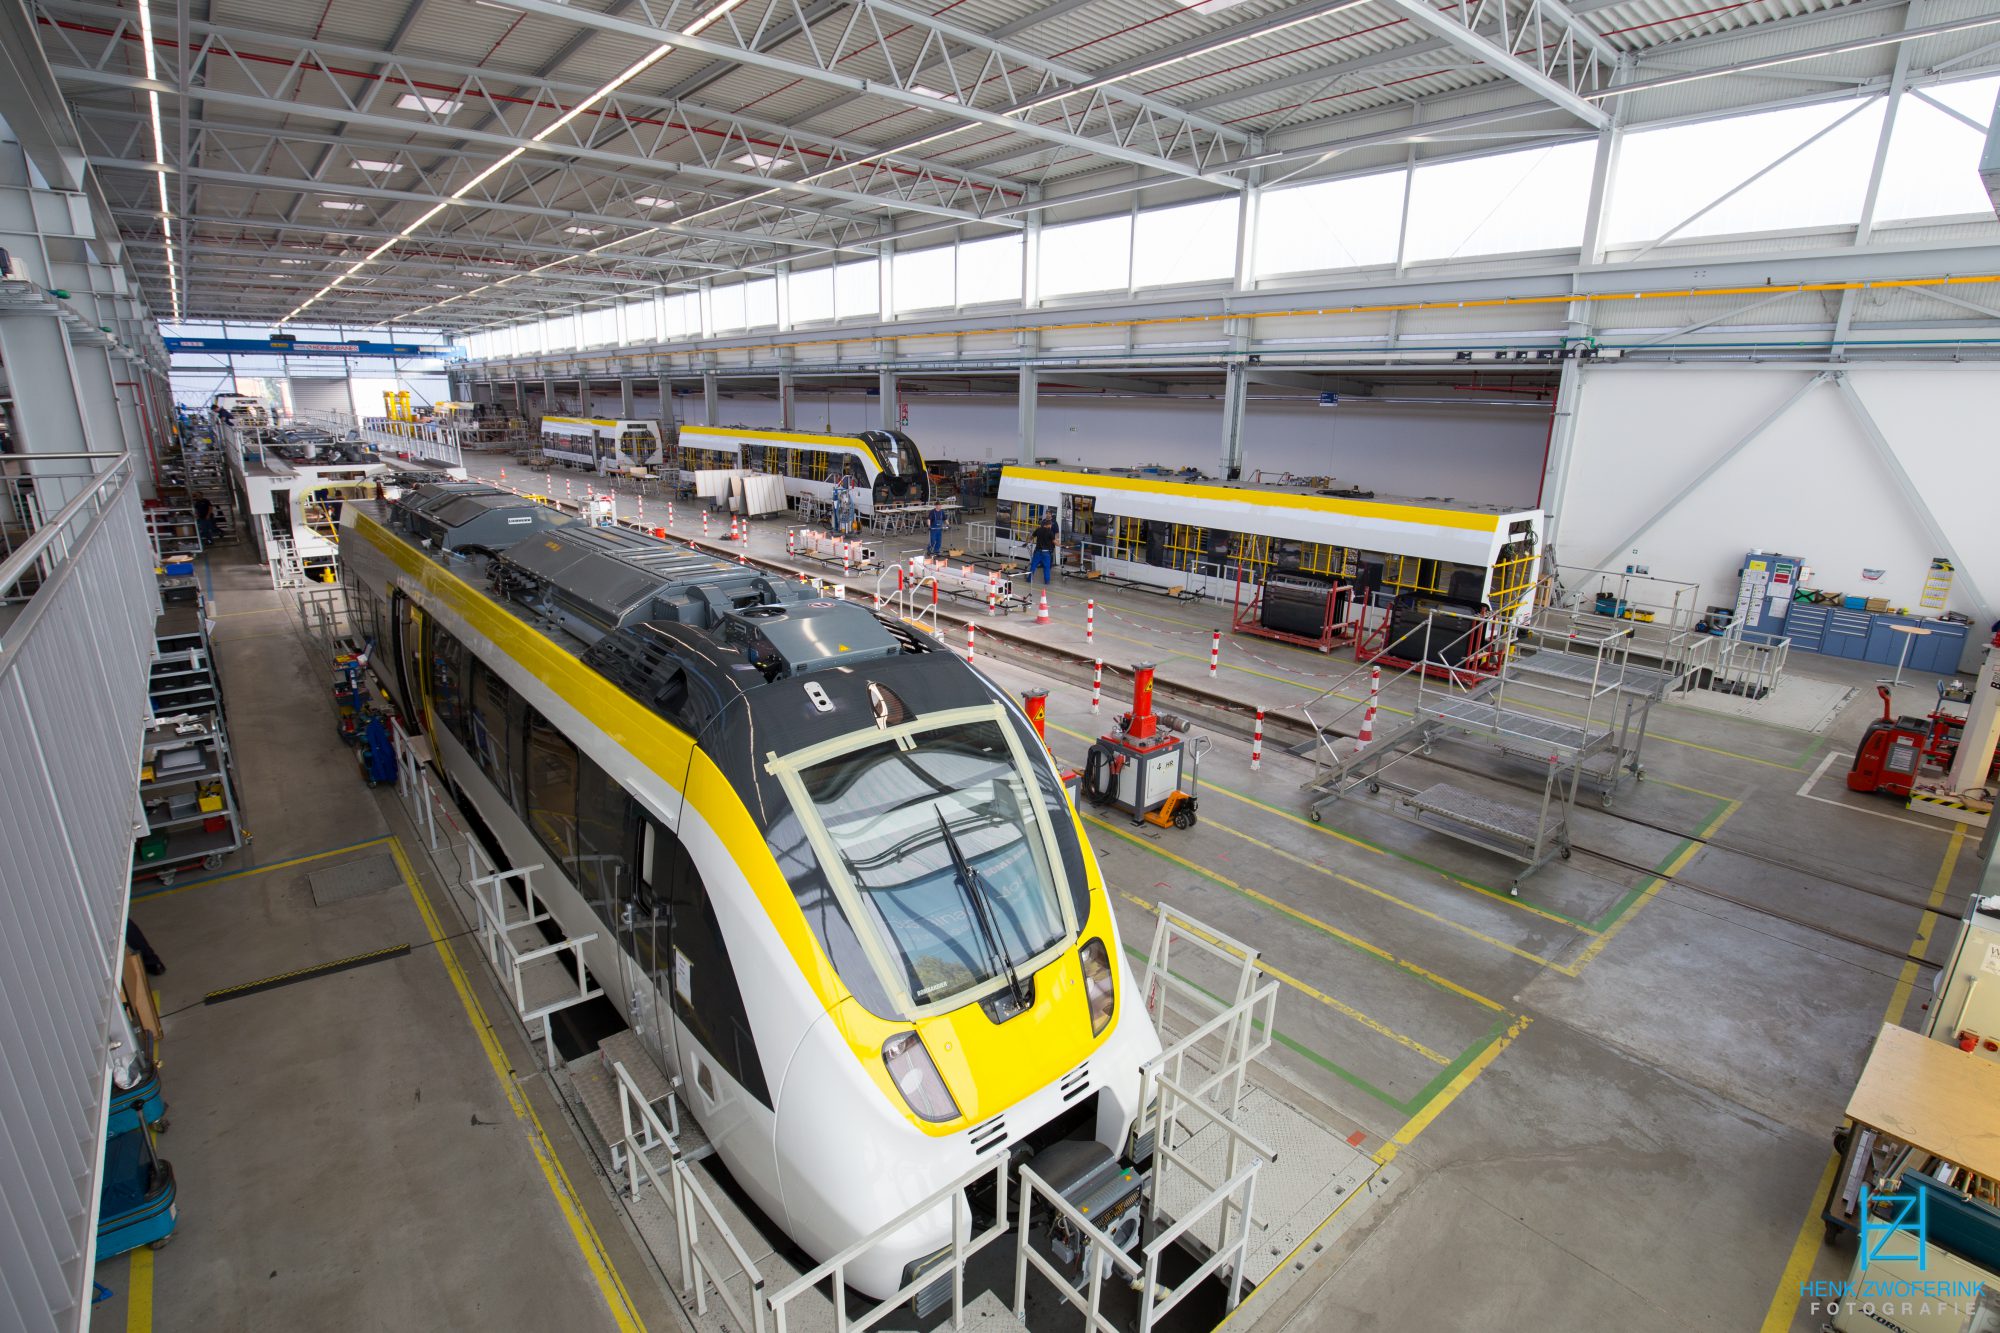 Bombardier @ Hennigsdorf: Building Talent2 trains for DB Regio, to be used at the Gäu-Murr network - Henk Zwoferink